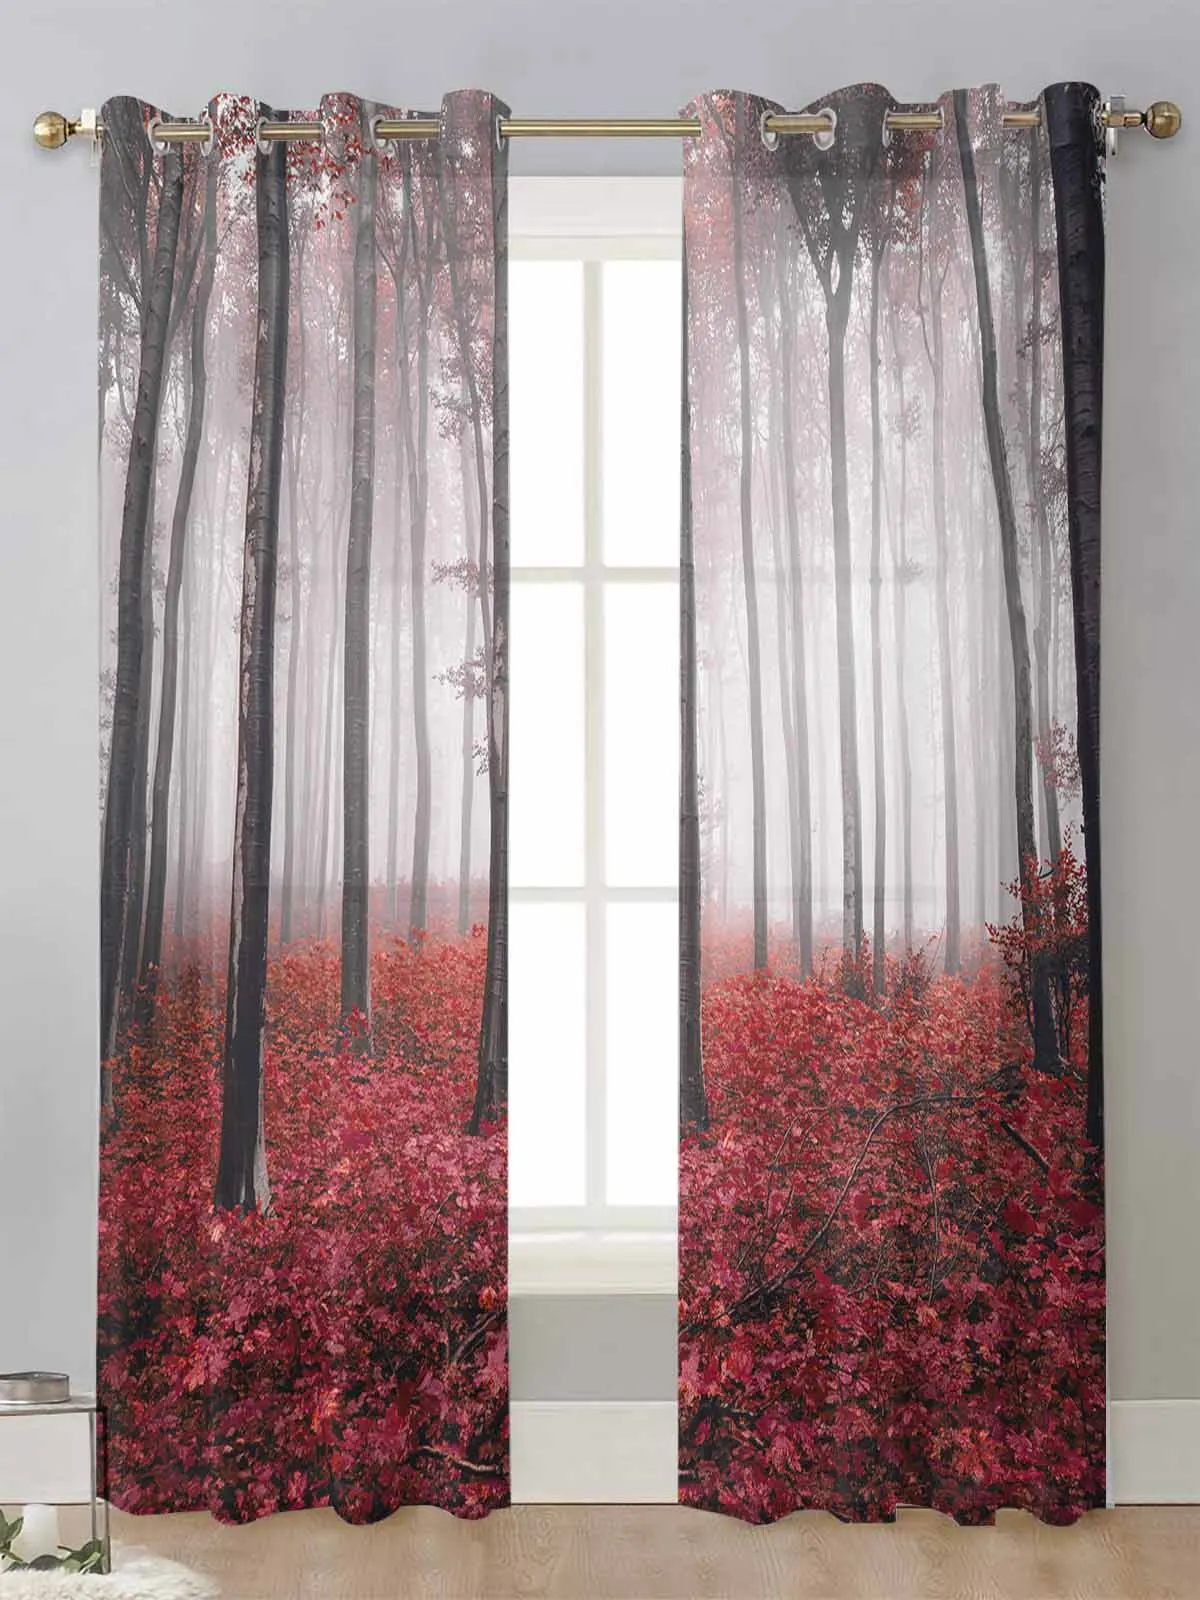 

Autumn Forest Maple Leaves Red Sheer Curtains For Living Room Window Transparent Voile Tulle Curtain Cortinas Drapes Home Decor